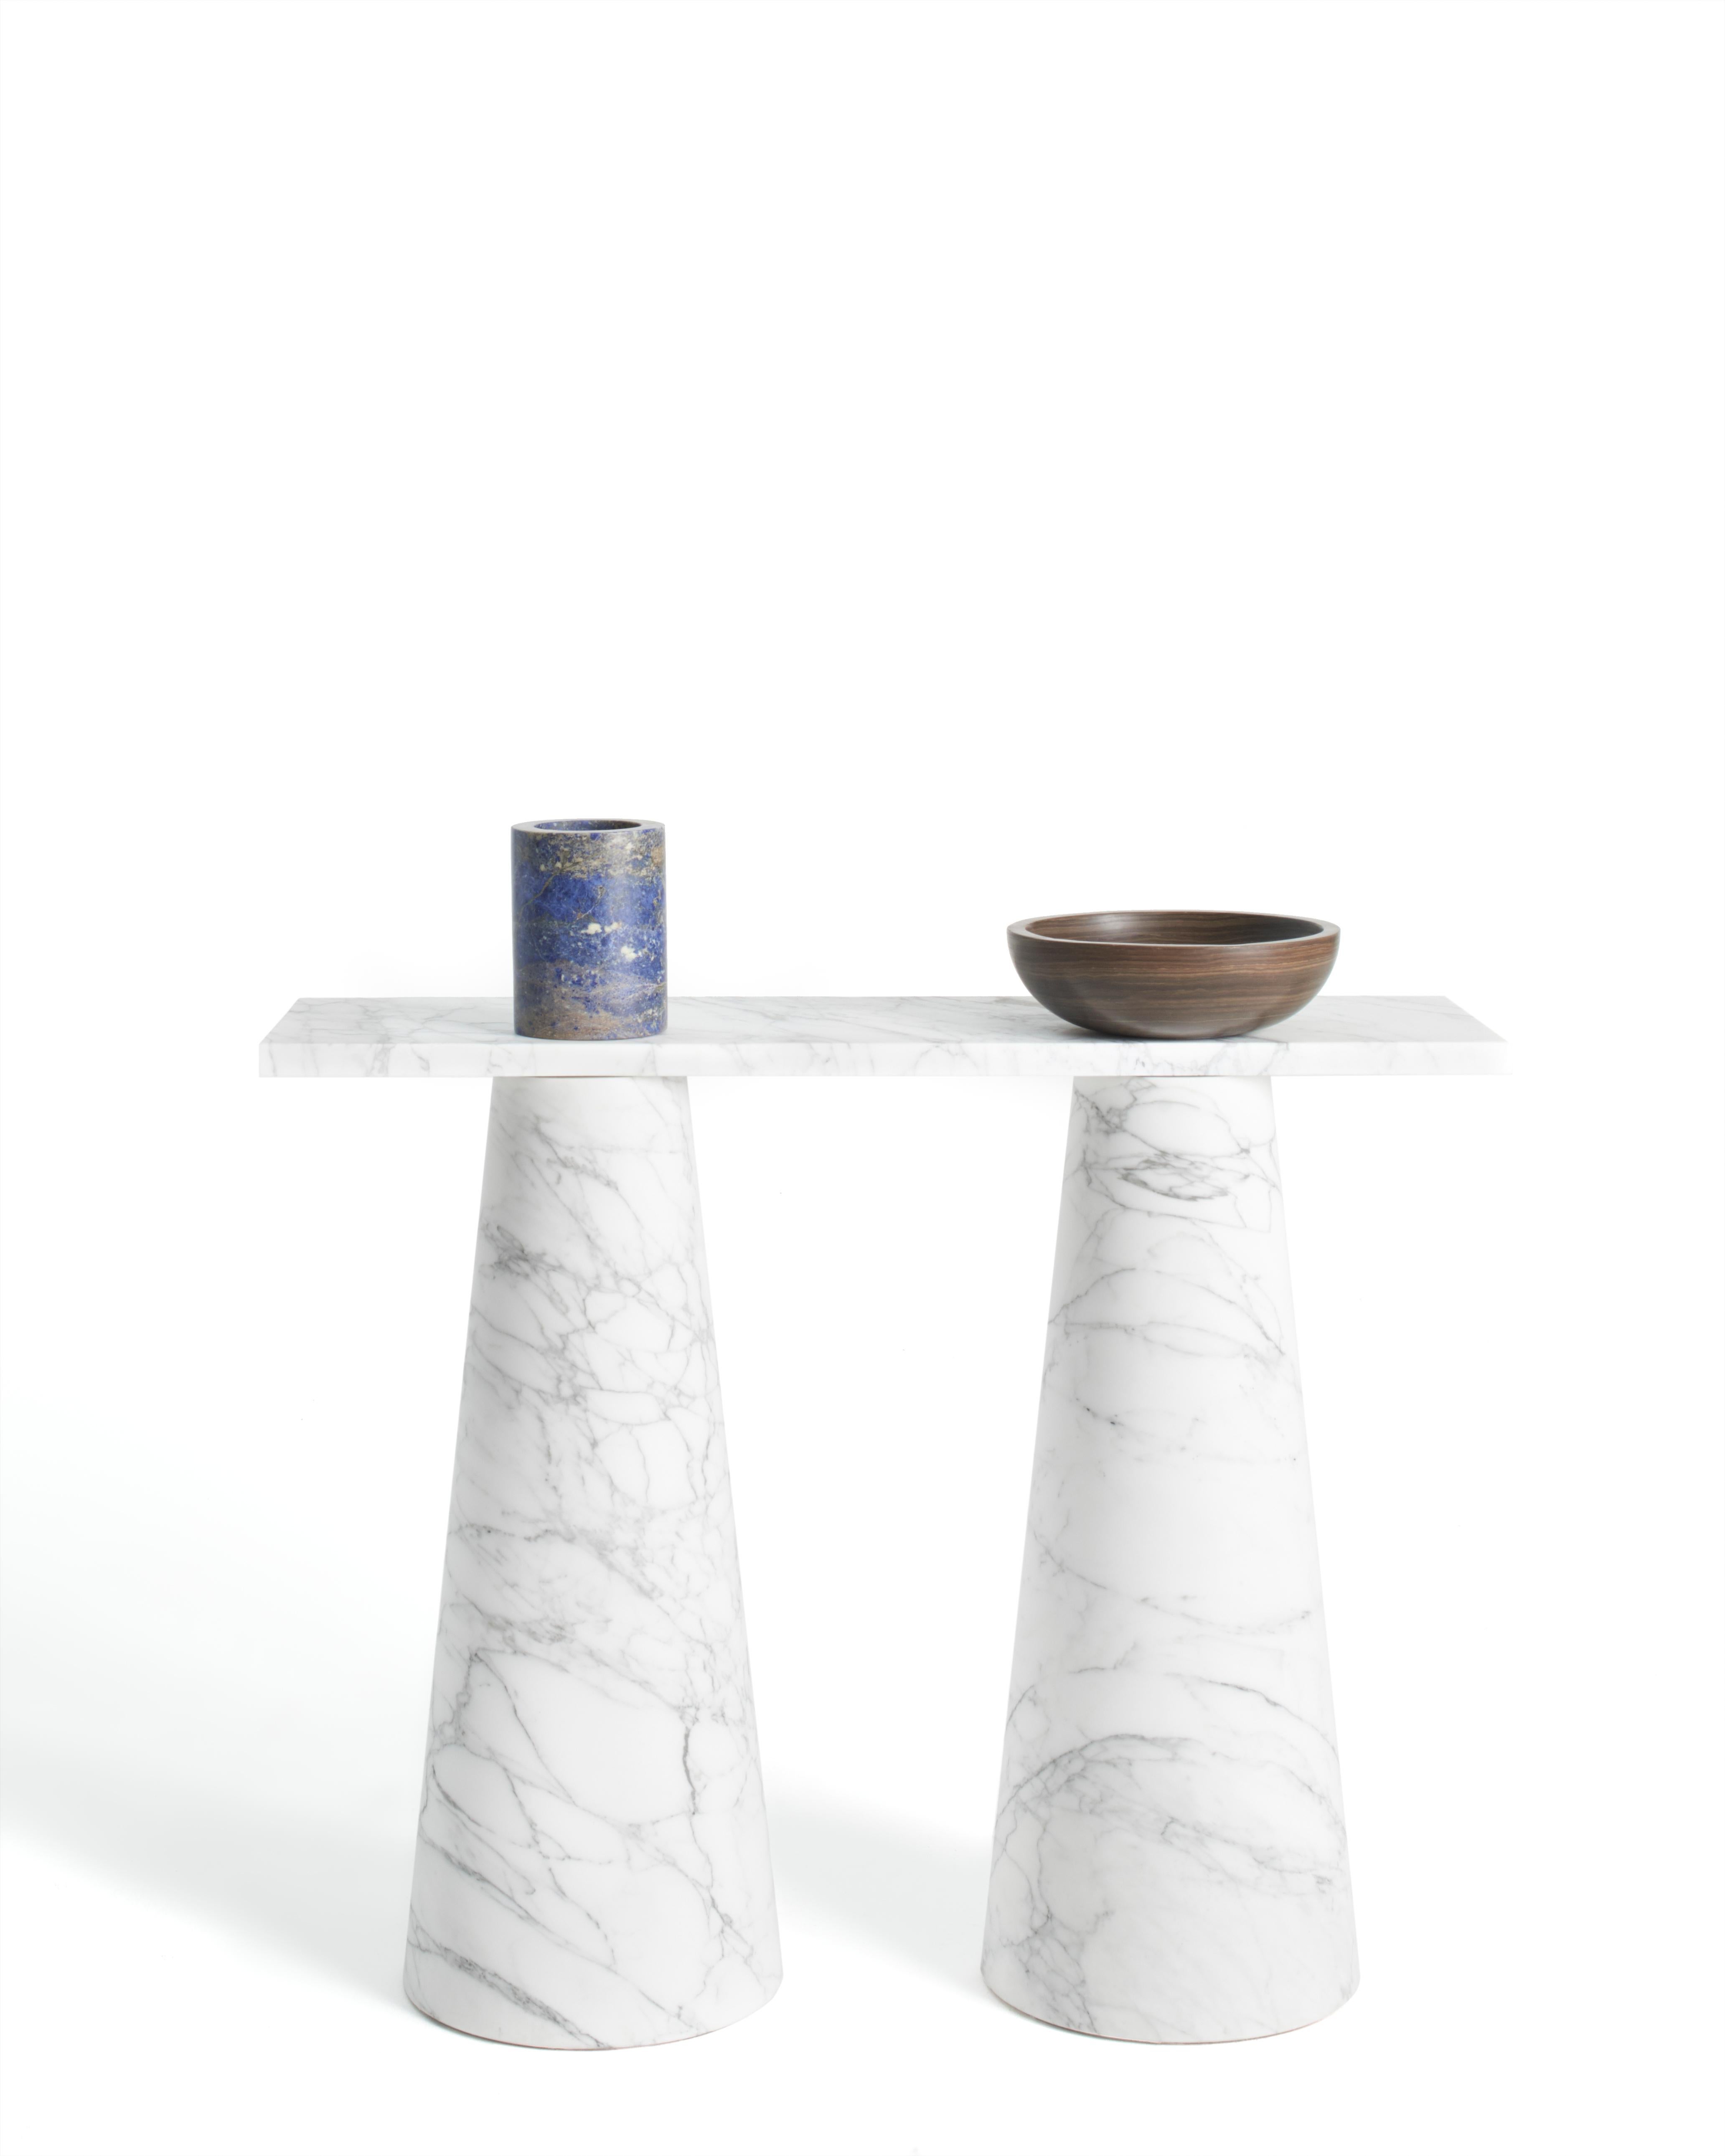 Marble inside out console by Karen Chekerdjian
Dimensions: H120 x D36 x W90
Materials: Bianco Arabescato

Karen’s trajectory into designing was unsystematic, comprised of a combination of practical experience in various creative fields and